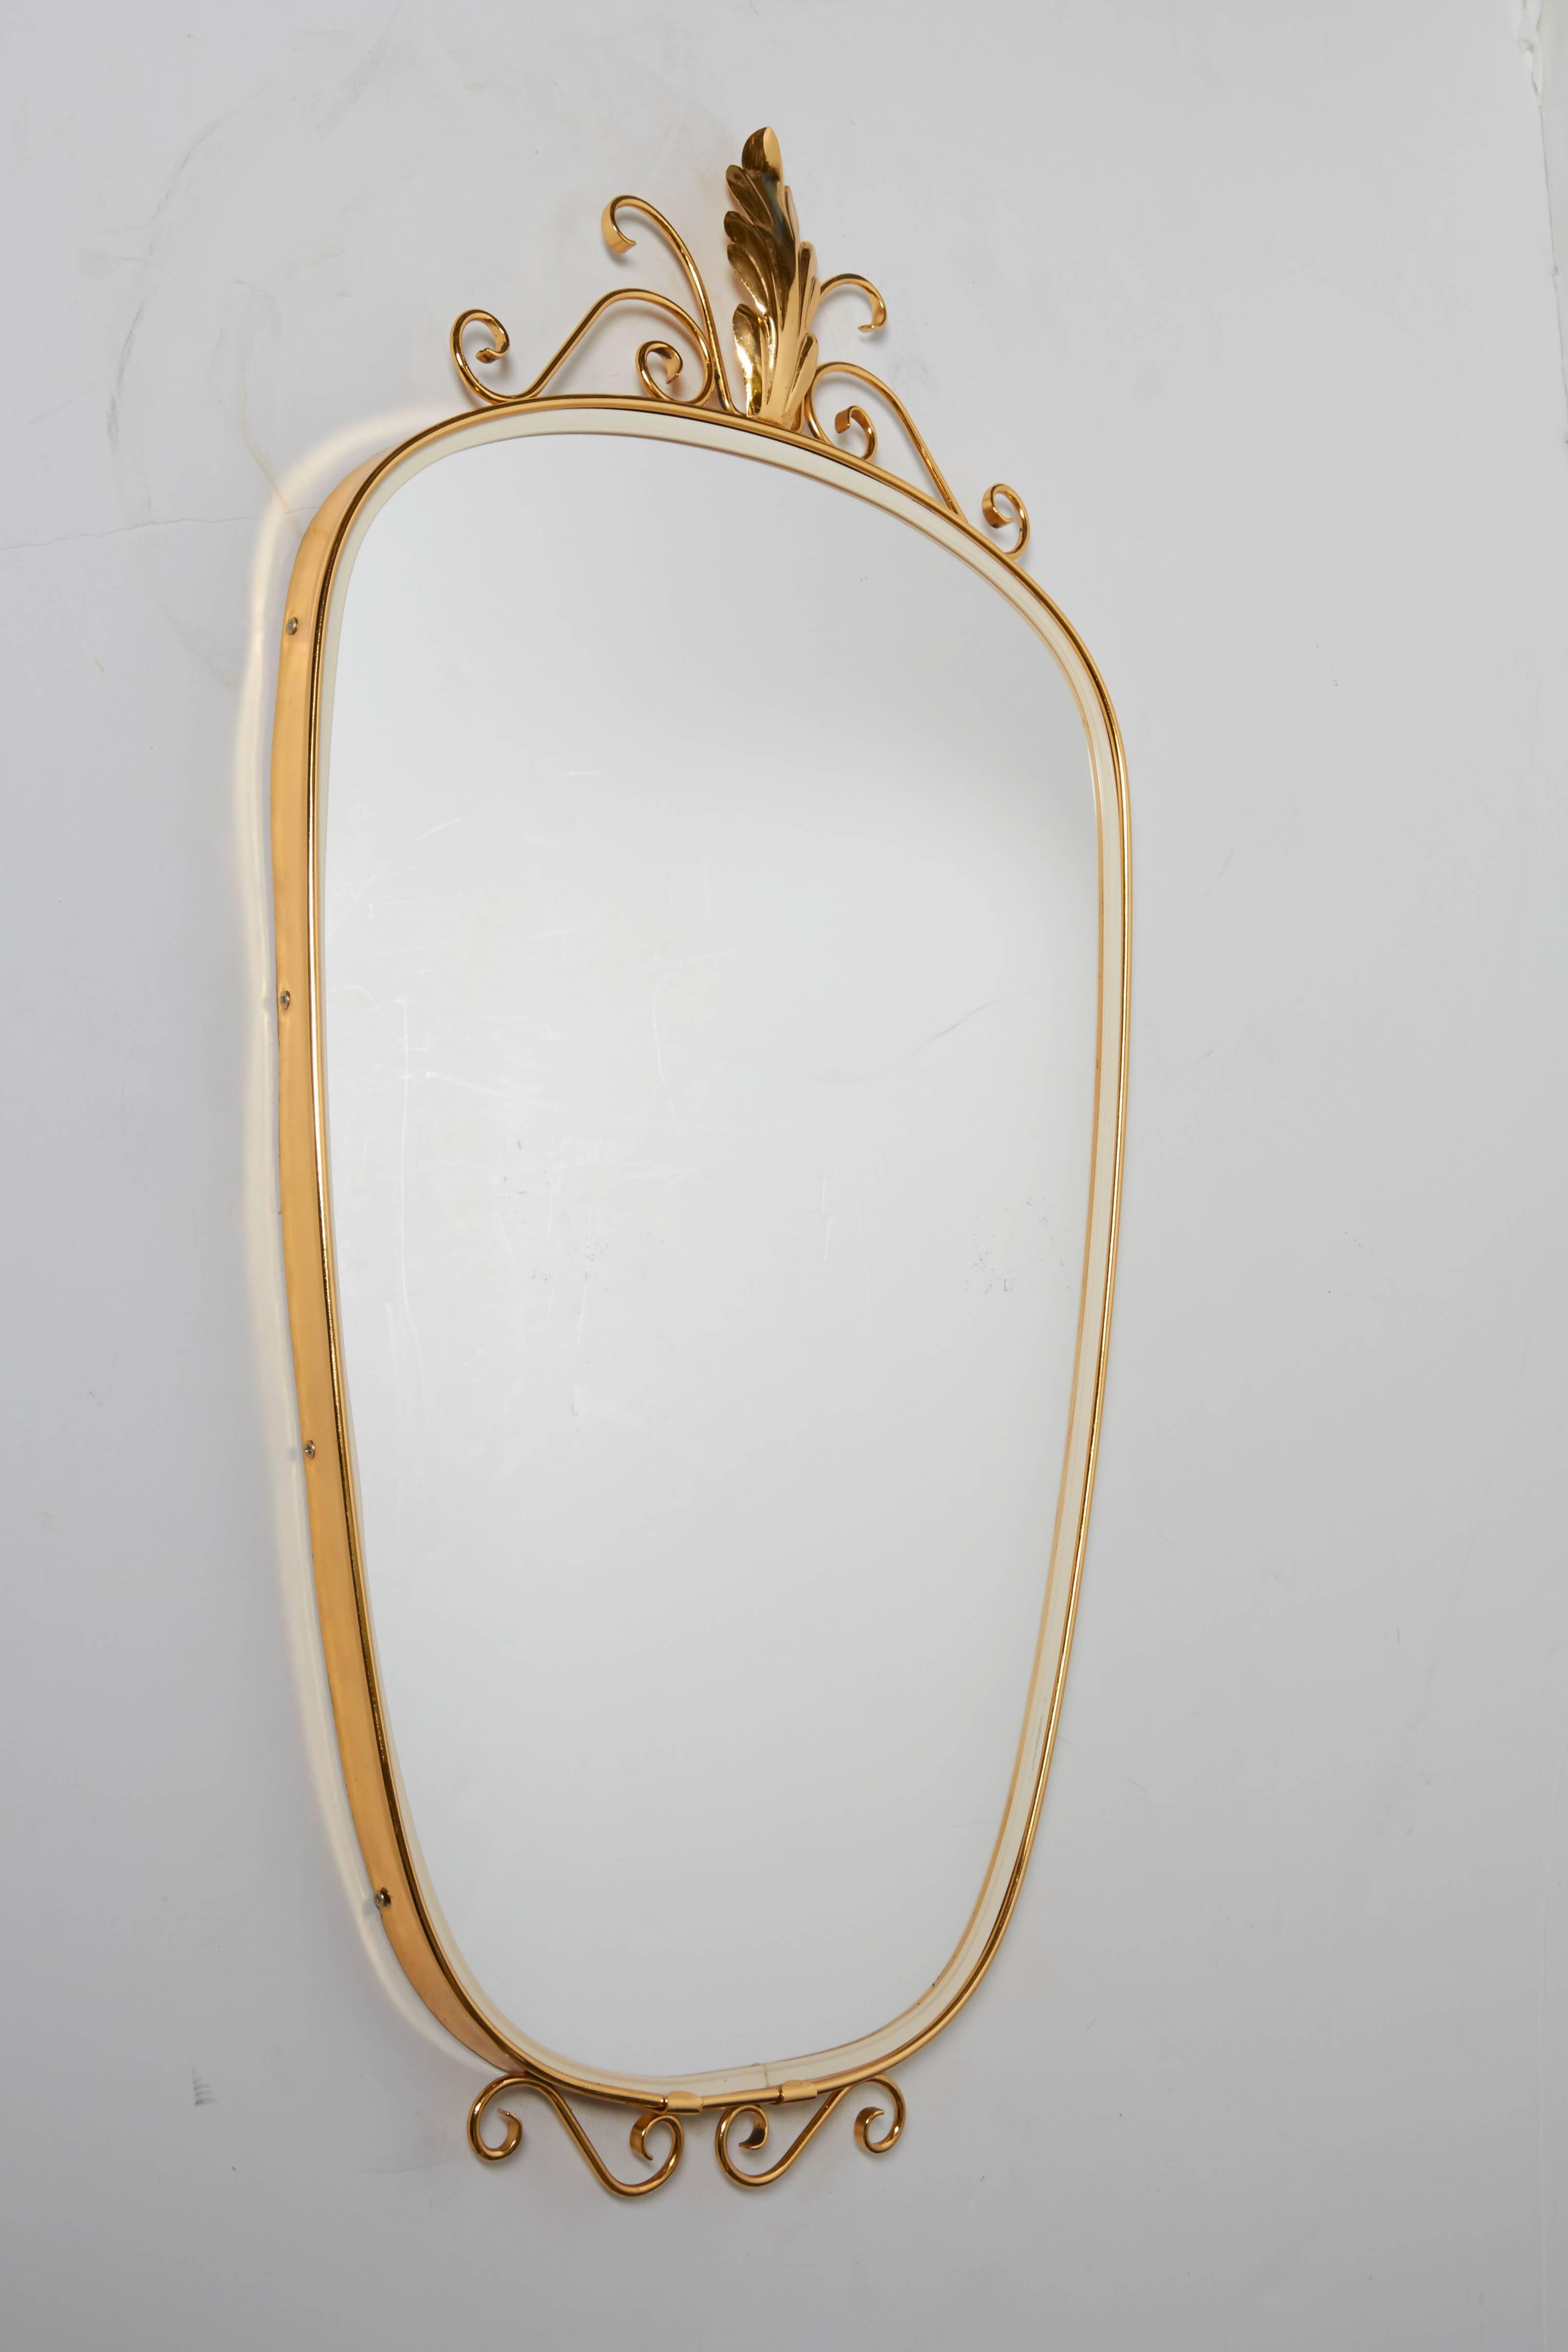 Italian 1950s oblong brass mirror with top acanthus leaf and scroll ornament and bottom scroll accents. Mirror has white rubber border inside brass frame. Measures 14.5" wide and 28.25" high. Brass newly polished and lacquered. Located in